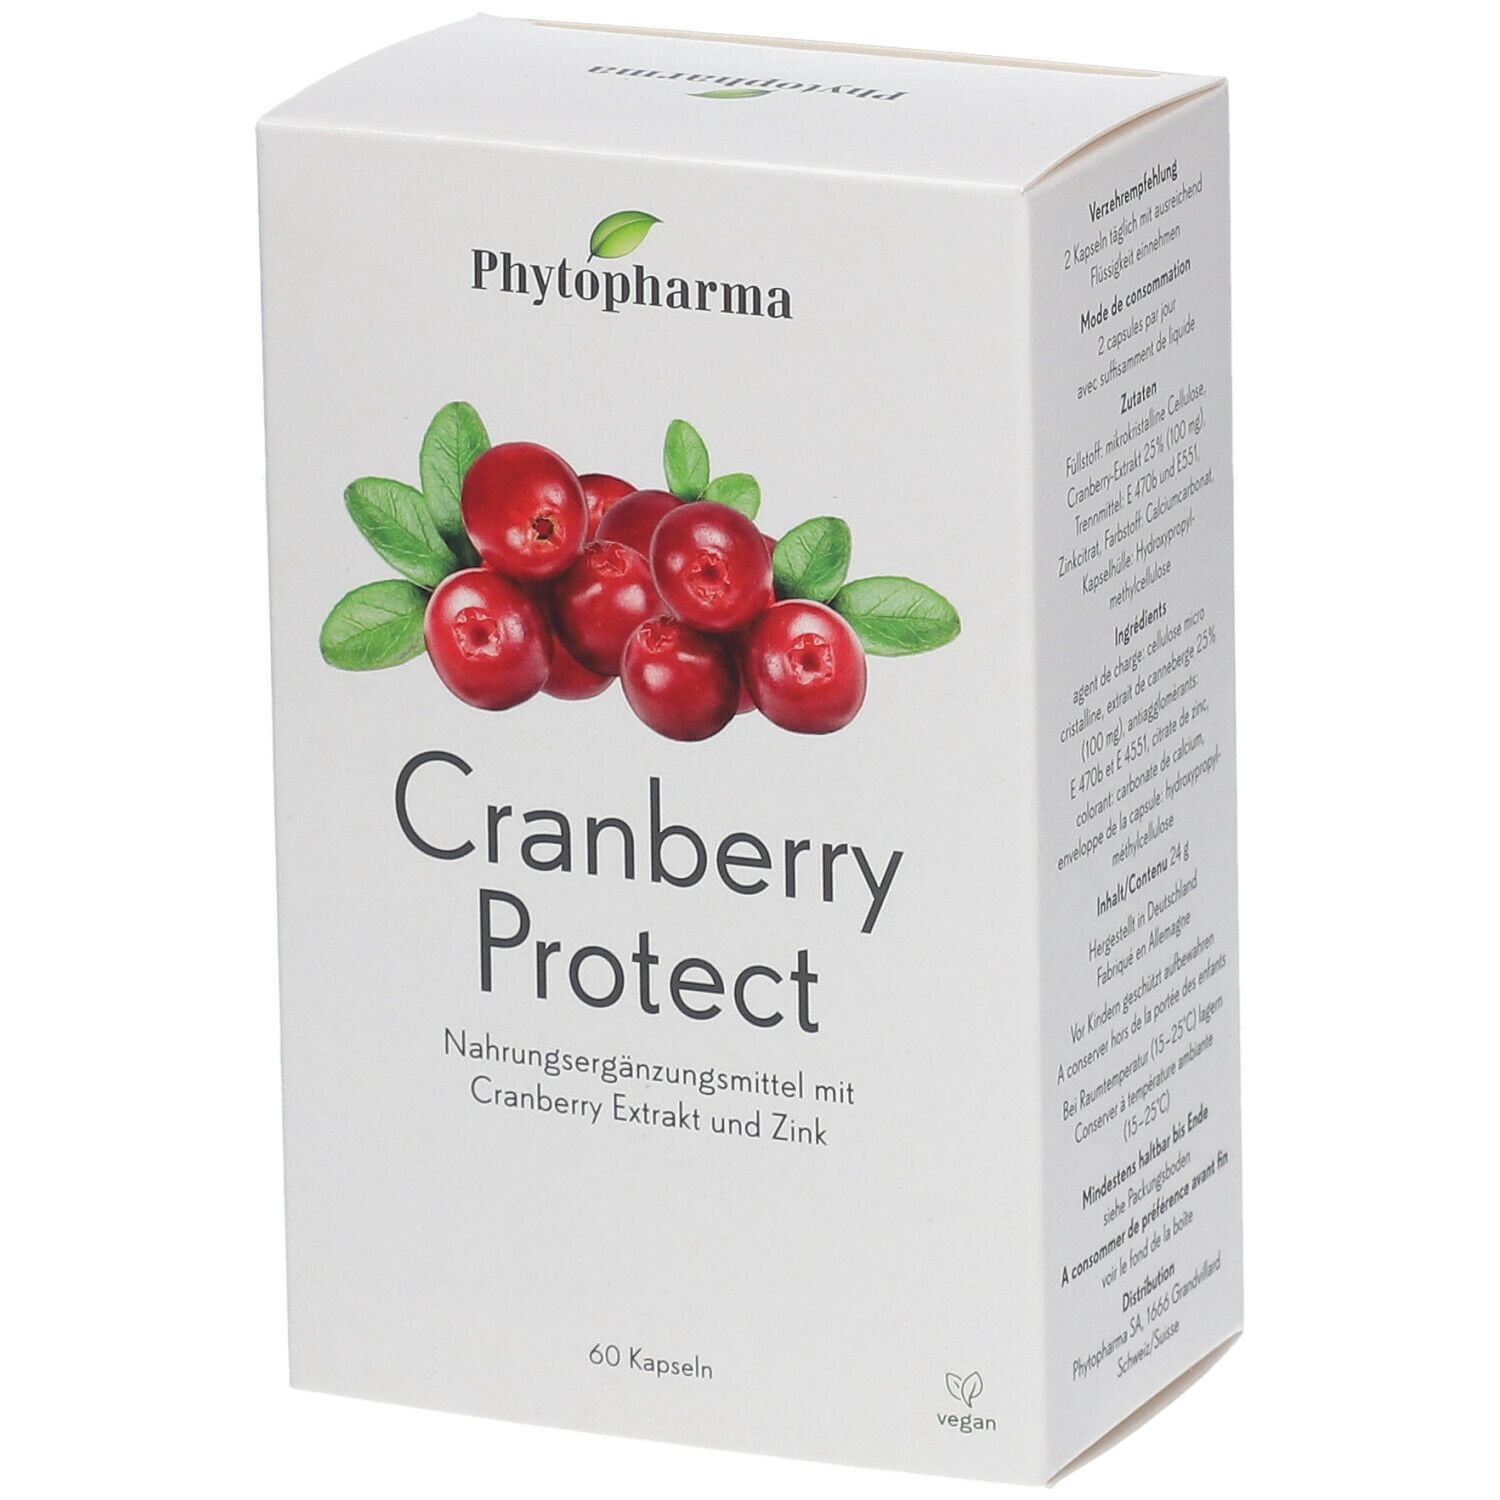 Image of Phytopharma Cranberry Protect